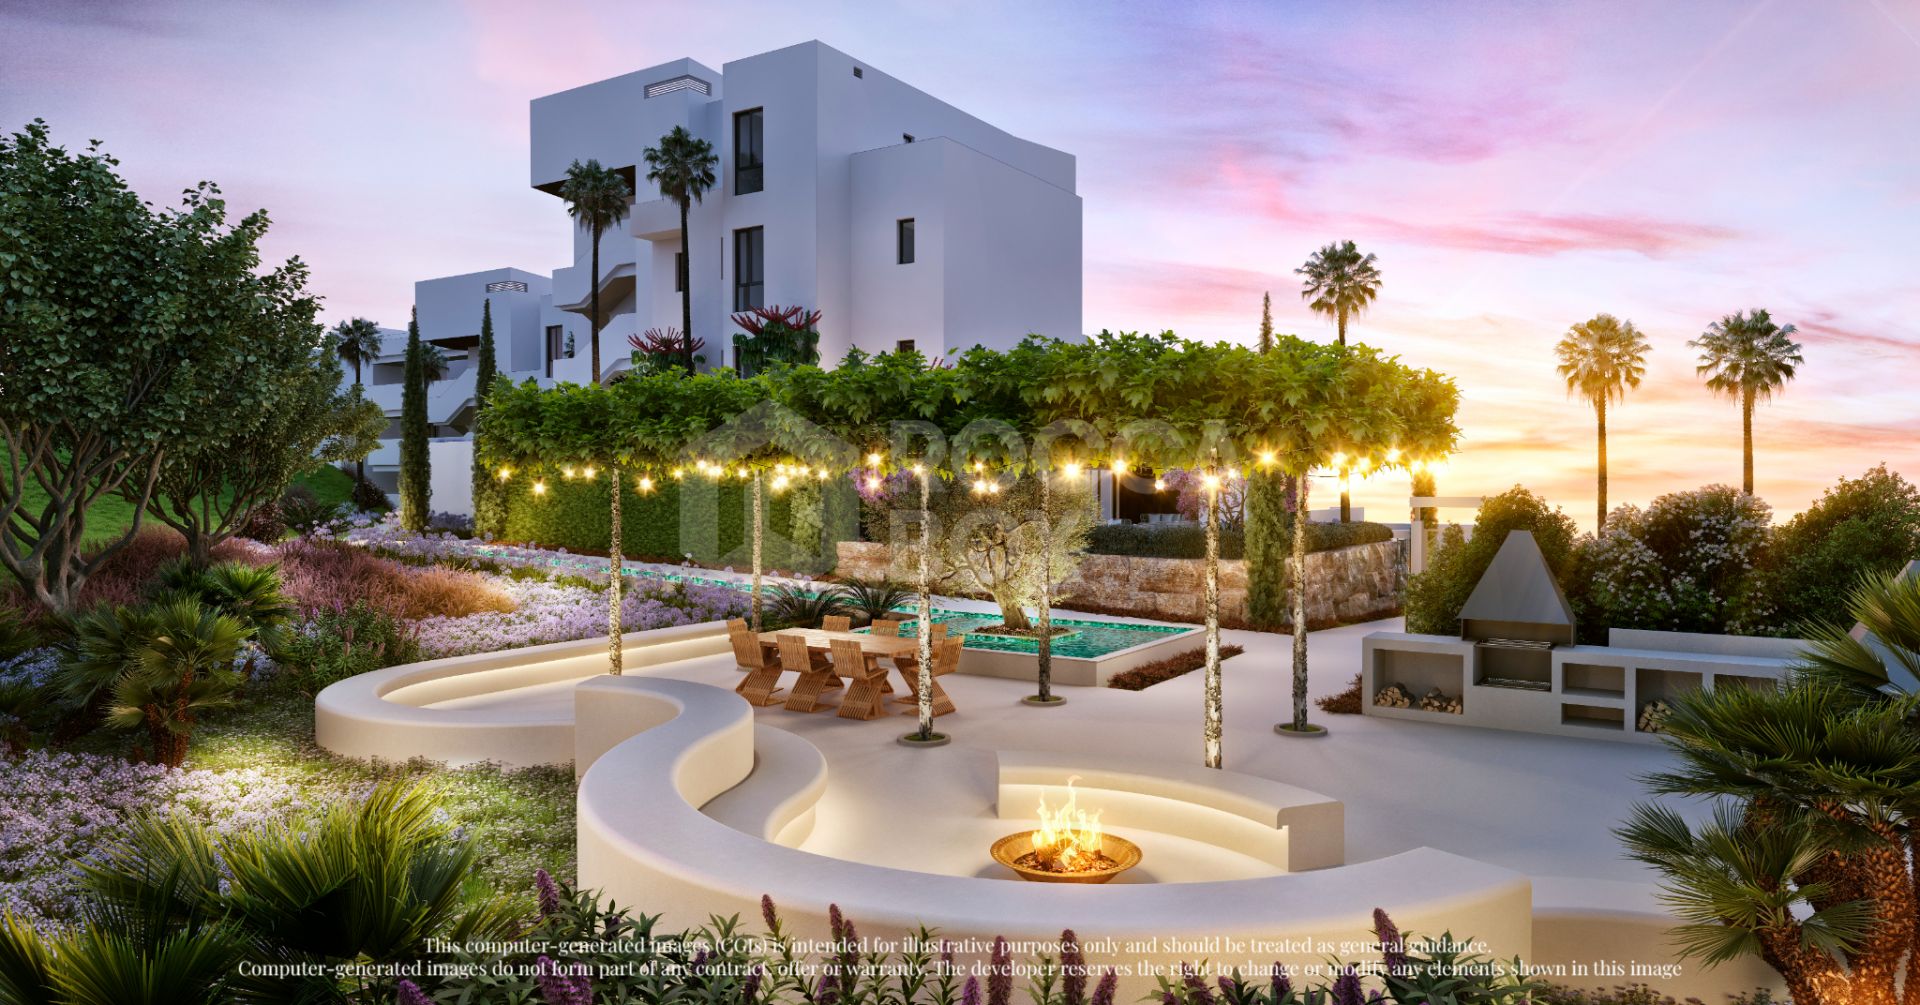 Discover the luxury living at Olivos, a 22-unit apartment community in the heart of Palo Alto.